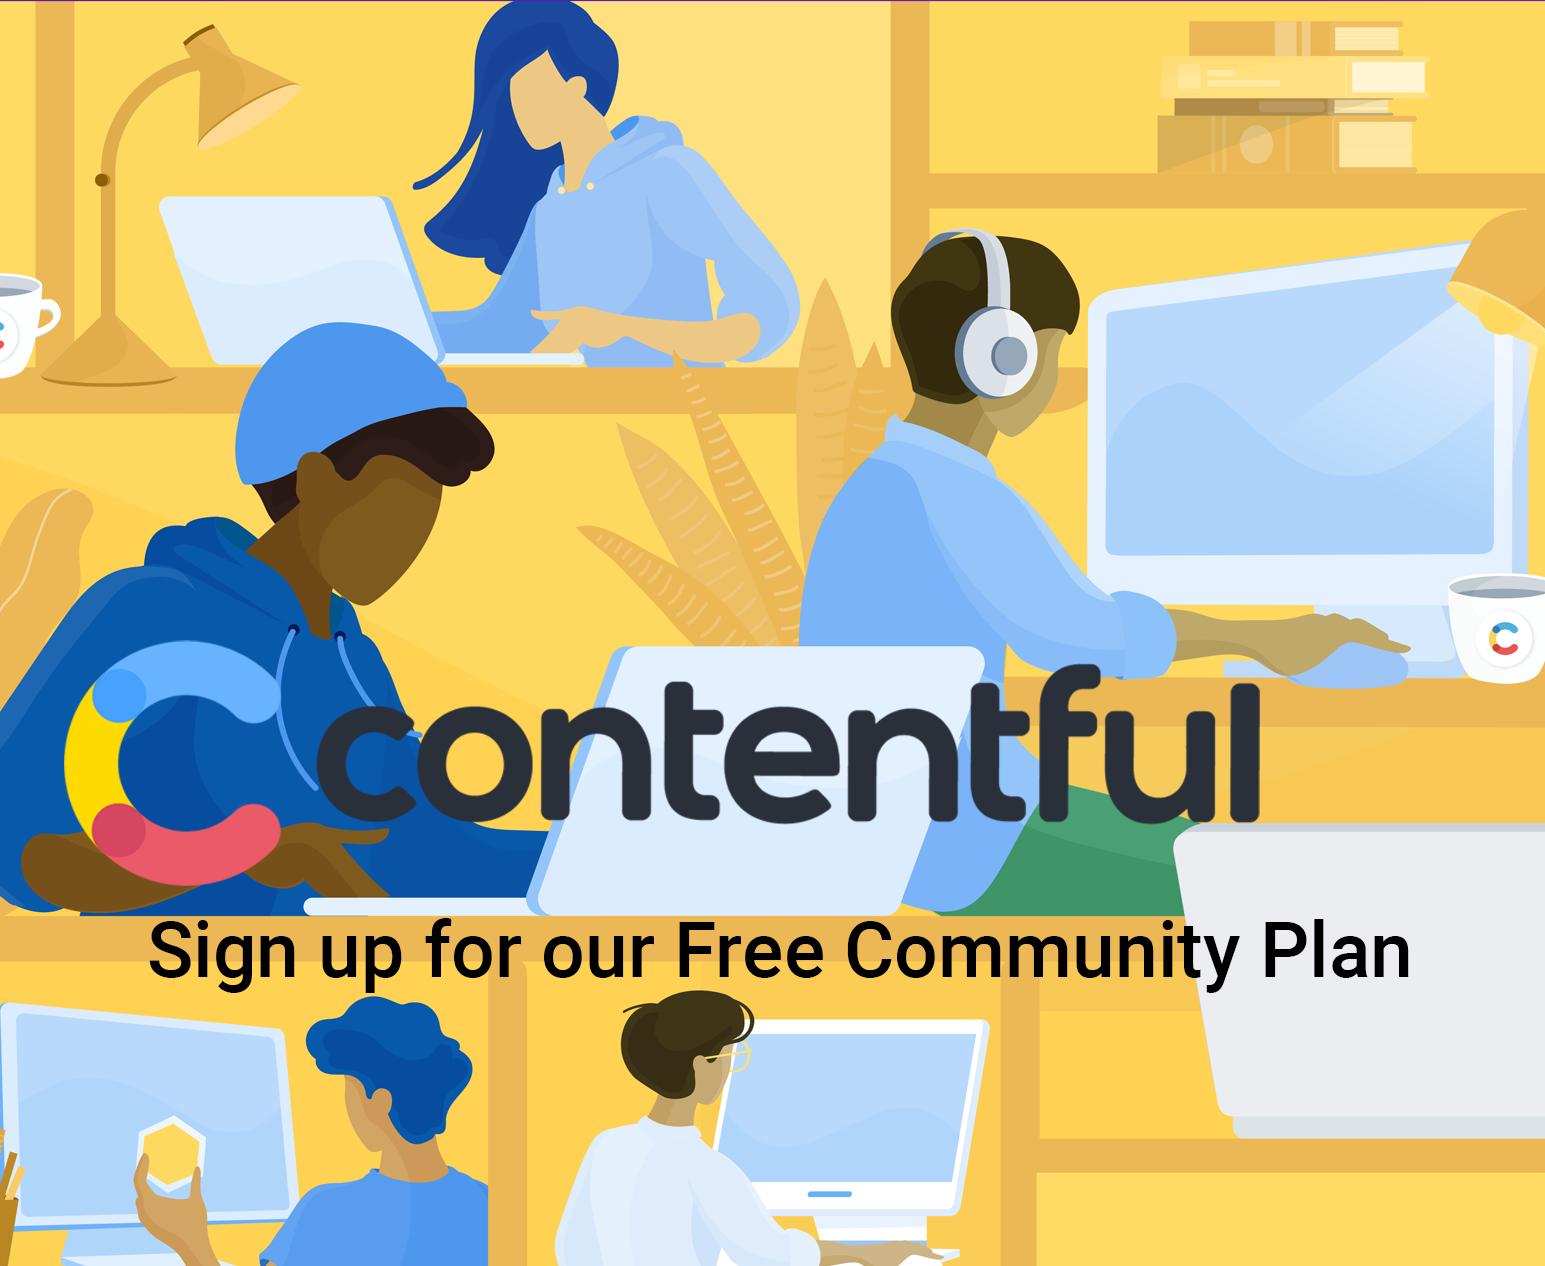 Sign up for a Free Community Plan